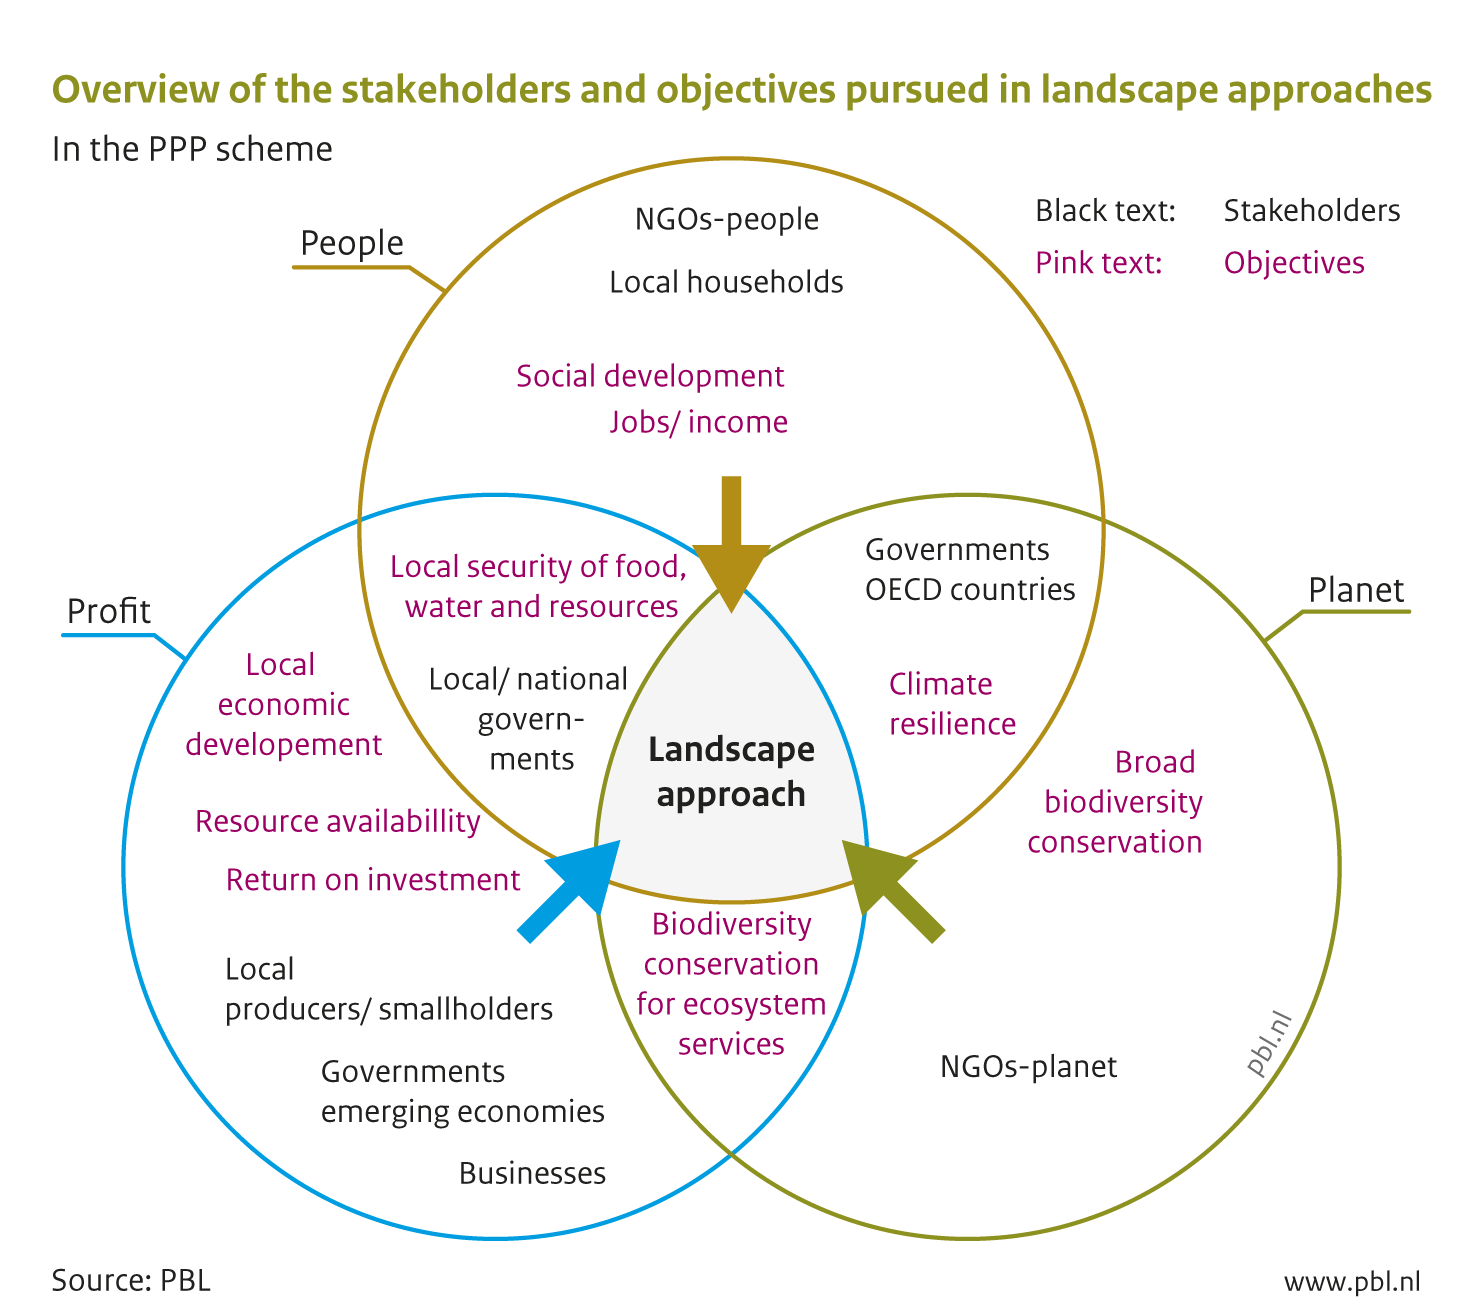 The landscape approach aims to develop a shared vision for the future by integrating the objectives of all stakeholders at landscape level, in order to establish long-term integrated sustainable development.